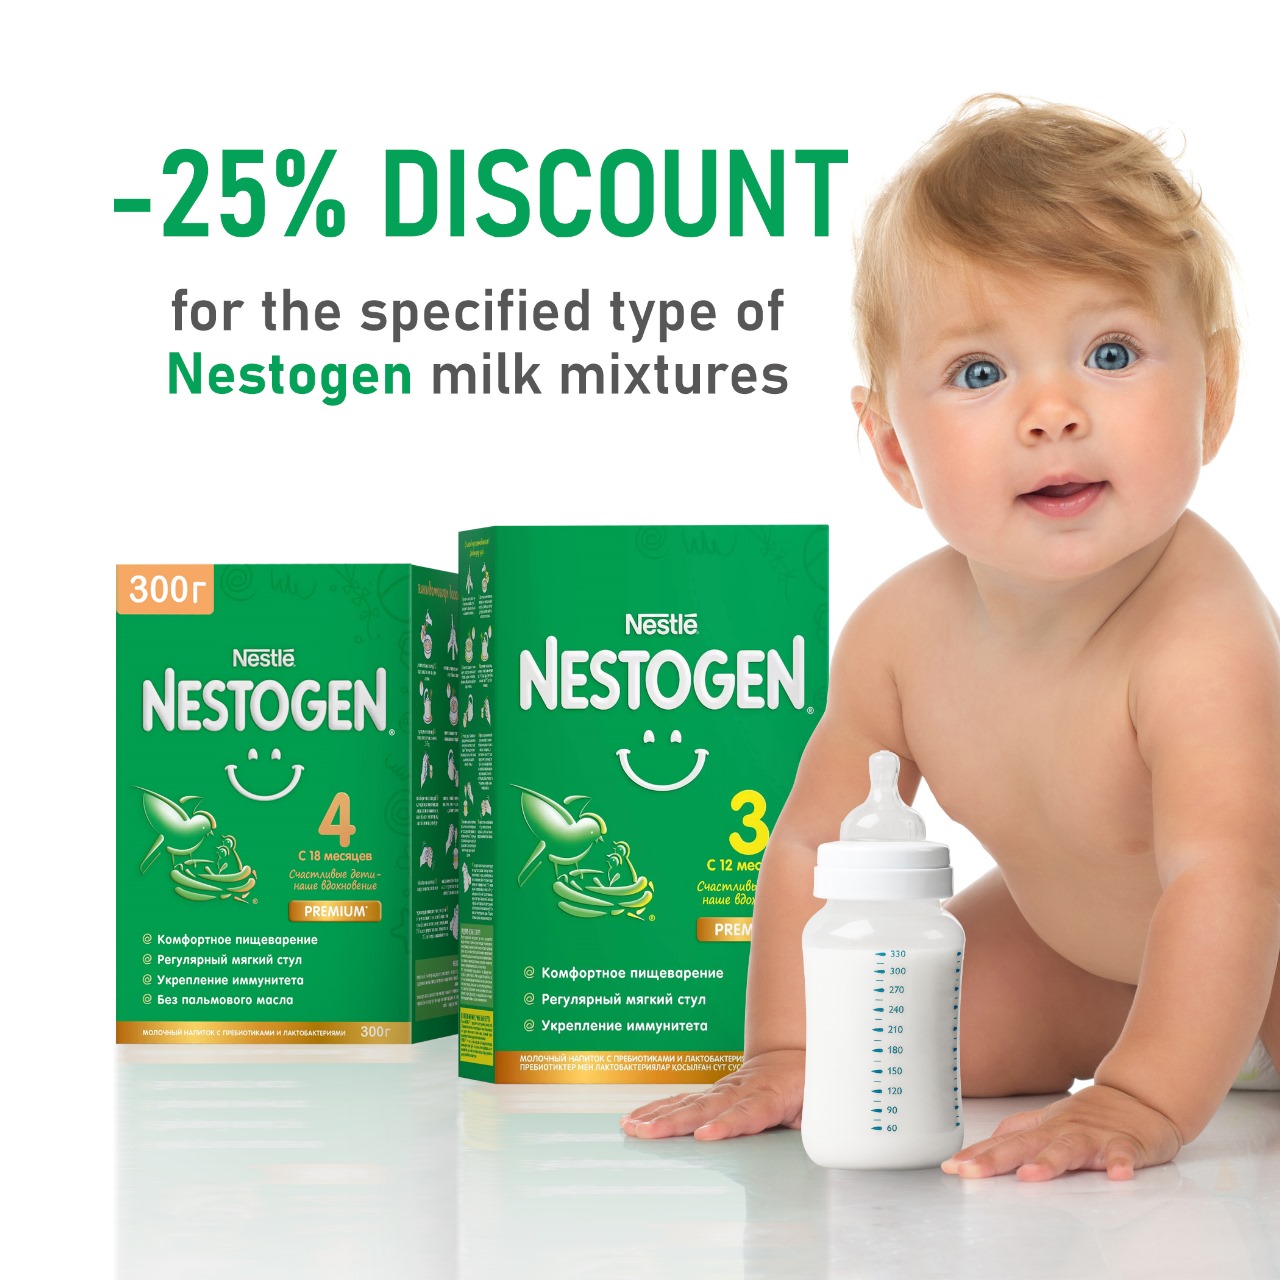 The specified range of Nestogen milk mixture at 25% discounted price